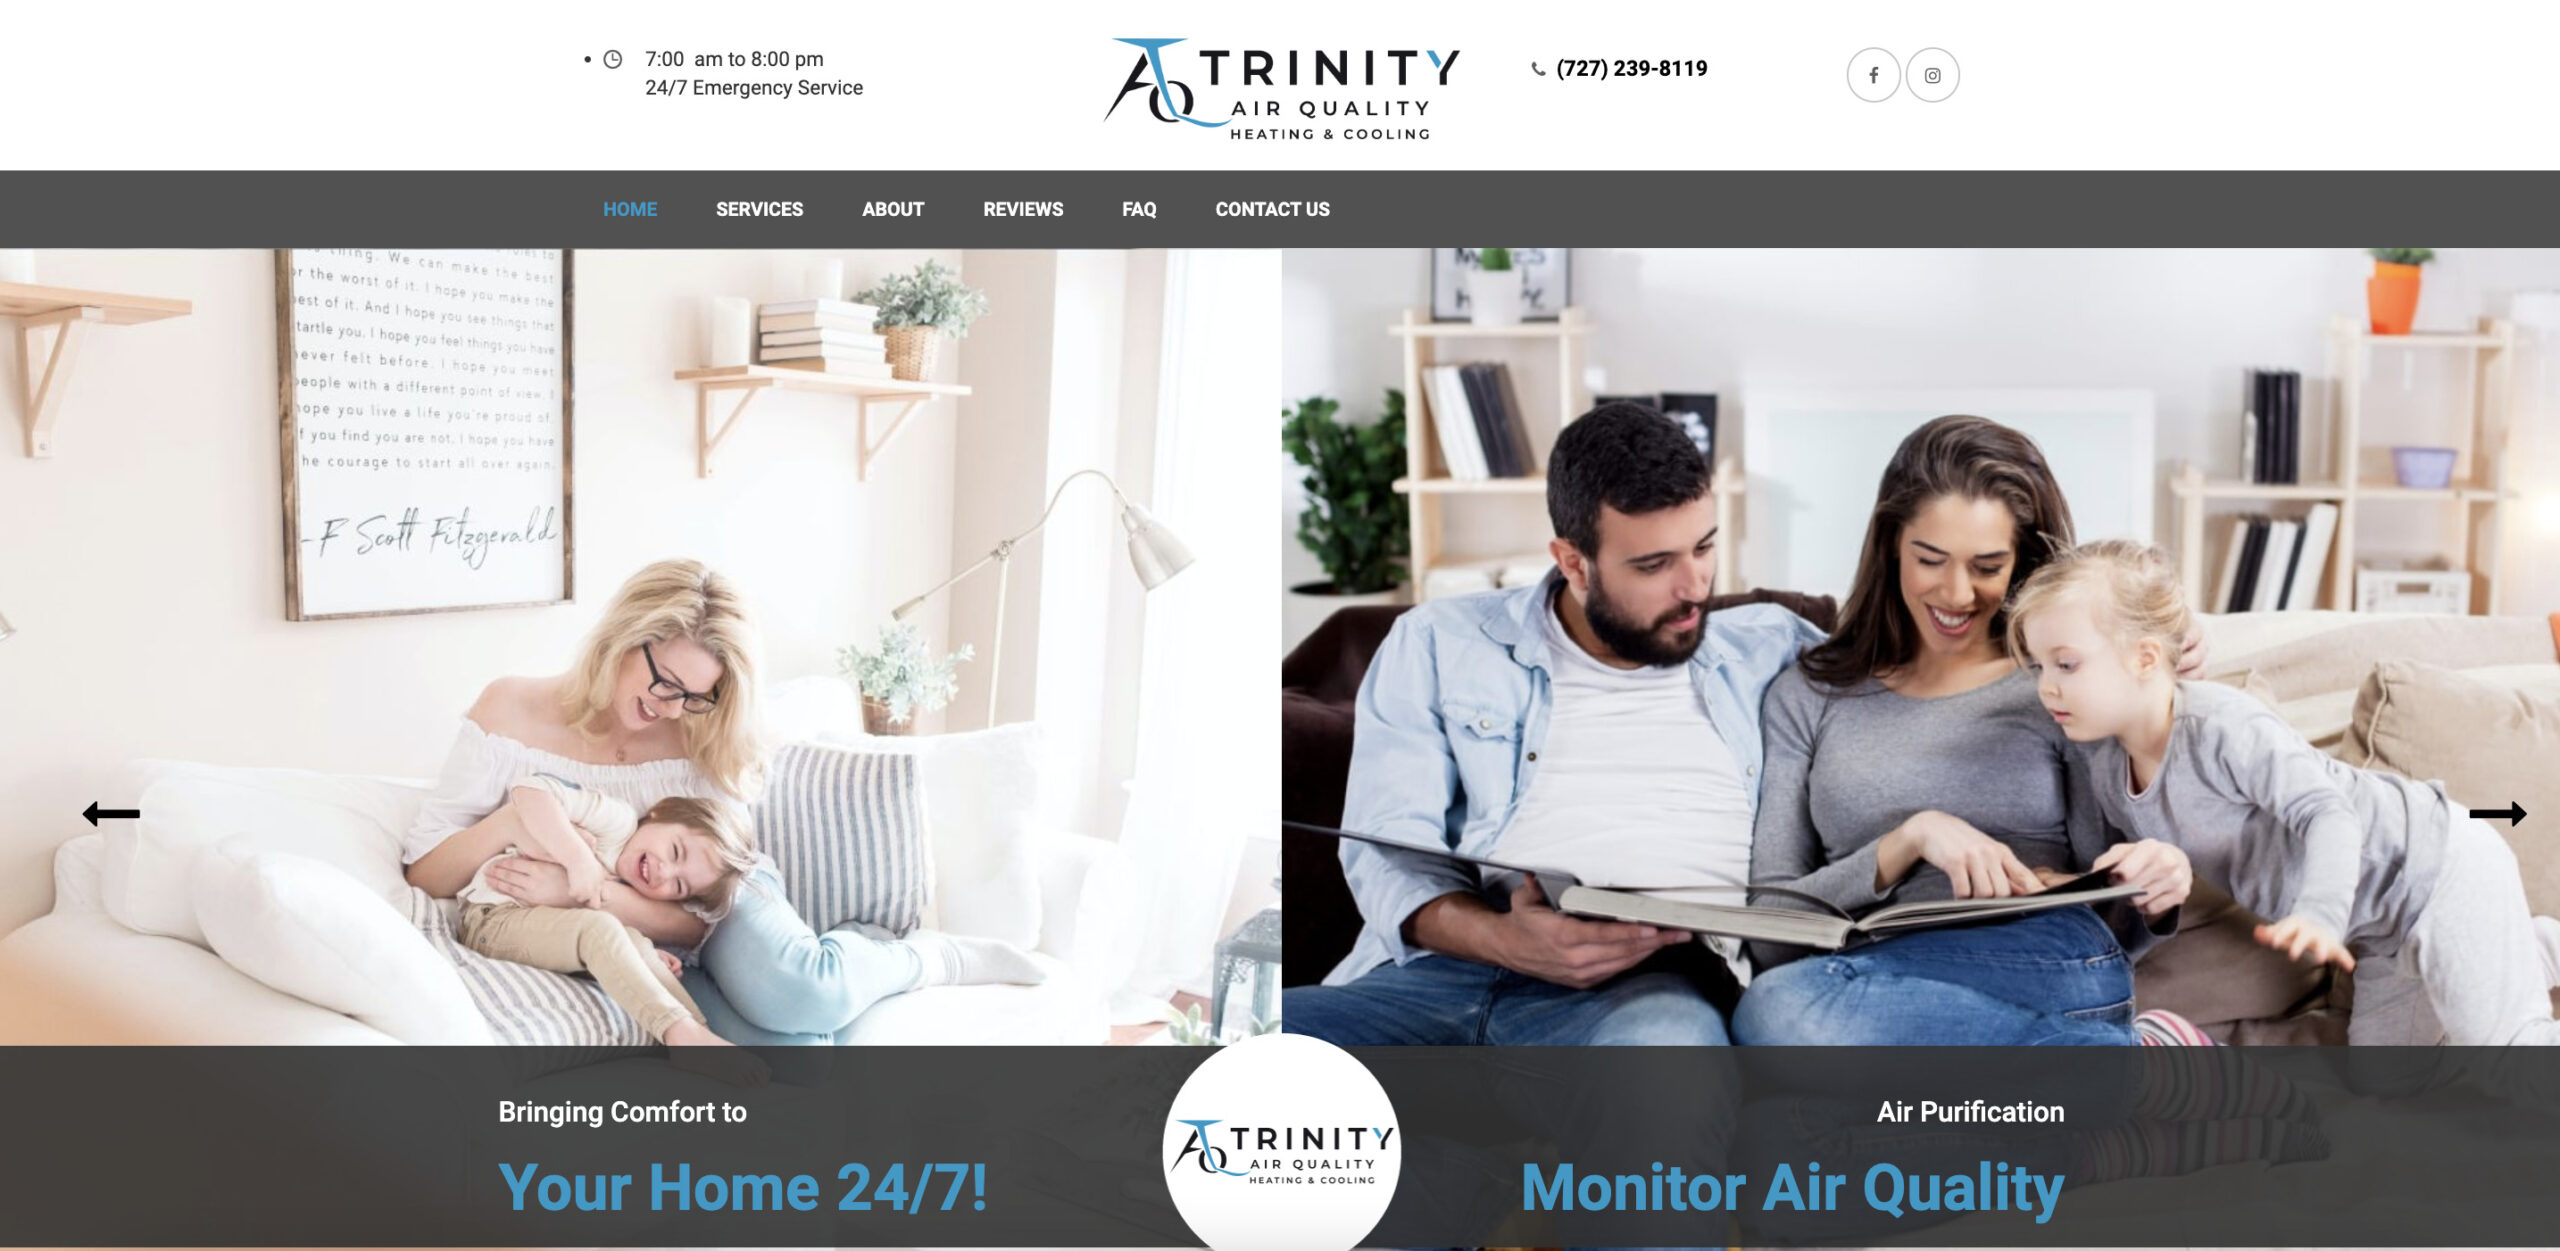 Trinity Air Quality - Safety Harbor Web Design Client